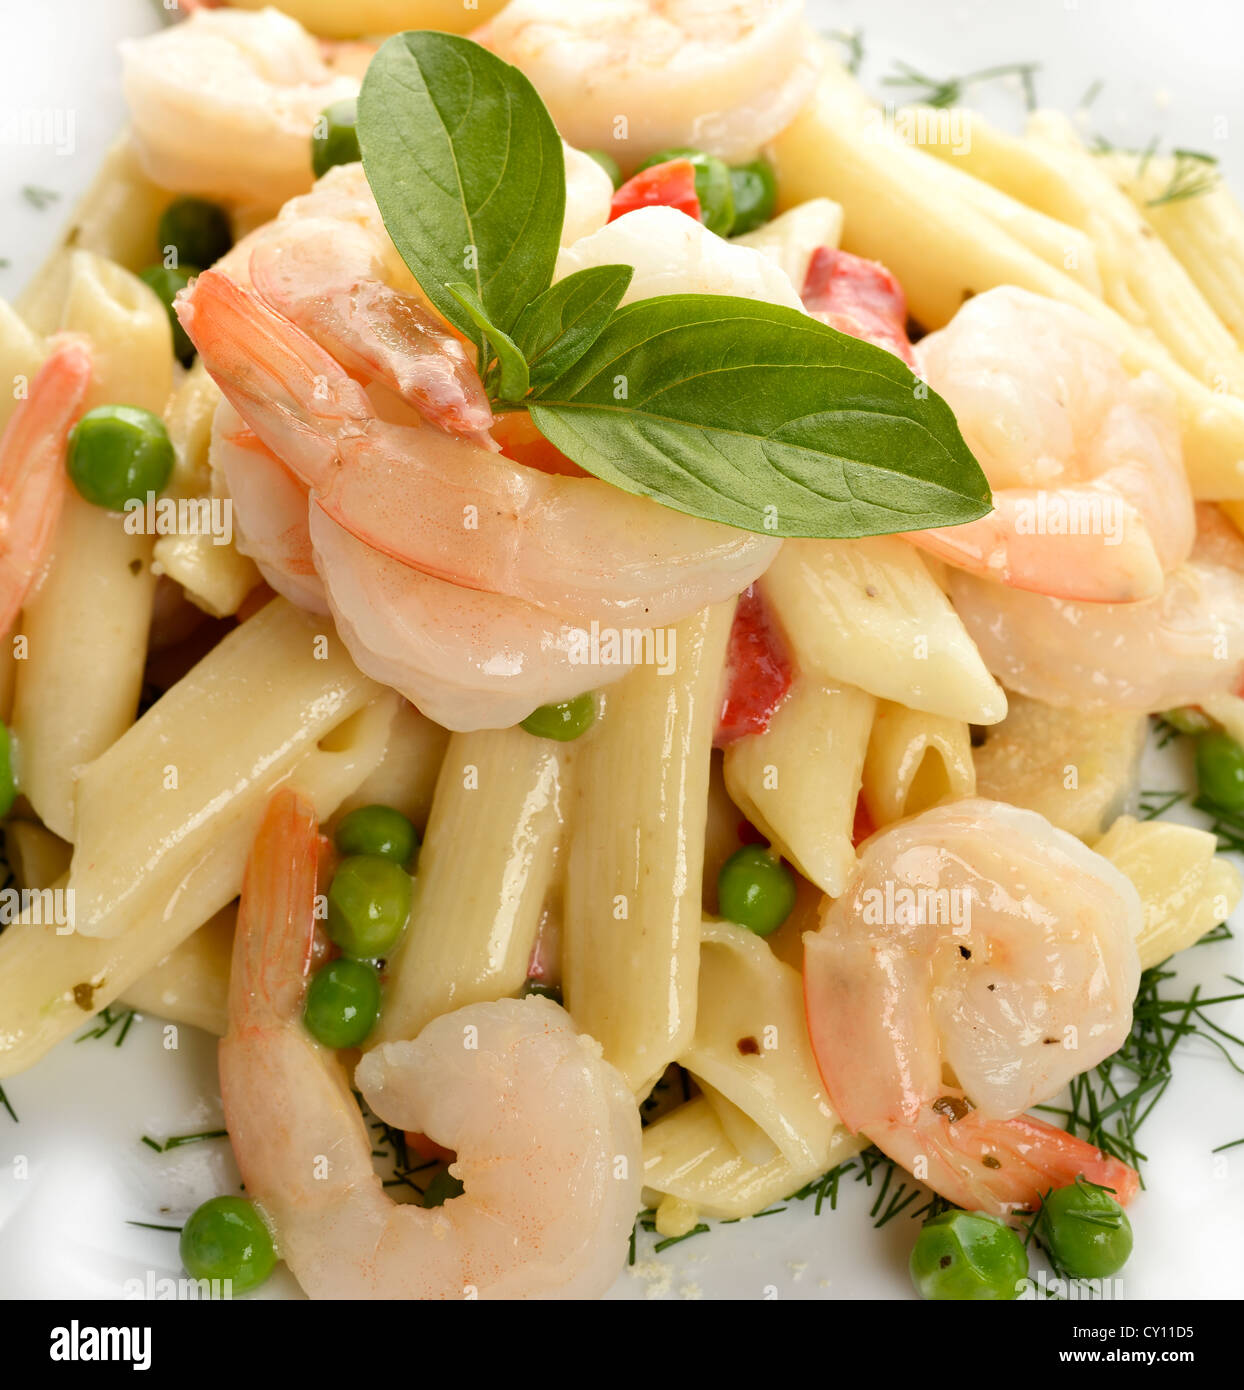 Pasta With Shrimps, Close Up Stock Photo